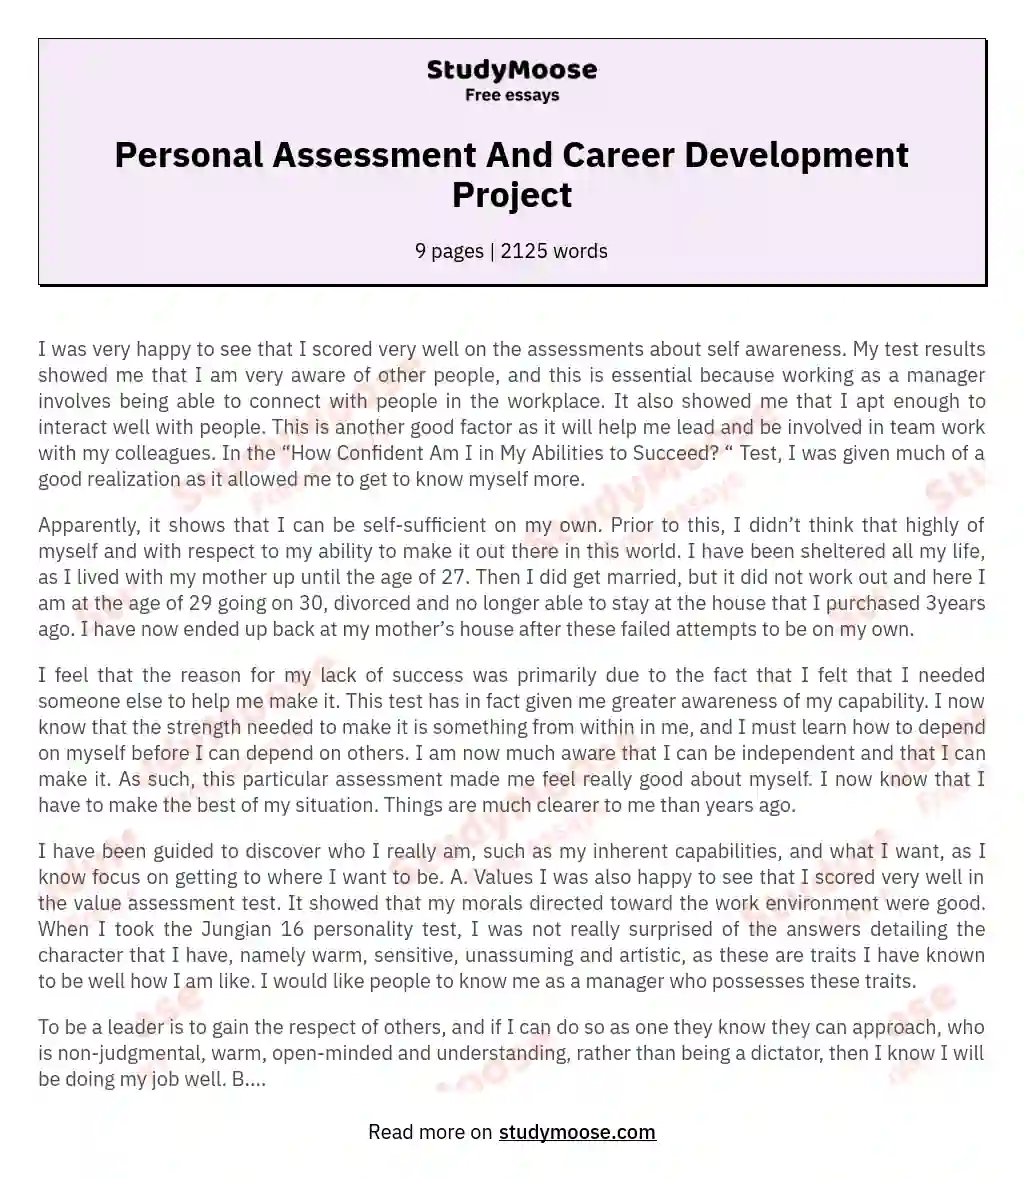 Personal Assessment And Career Development Project essay